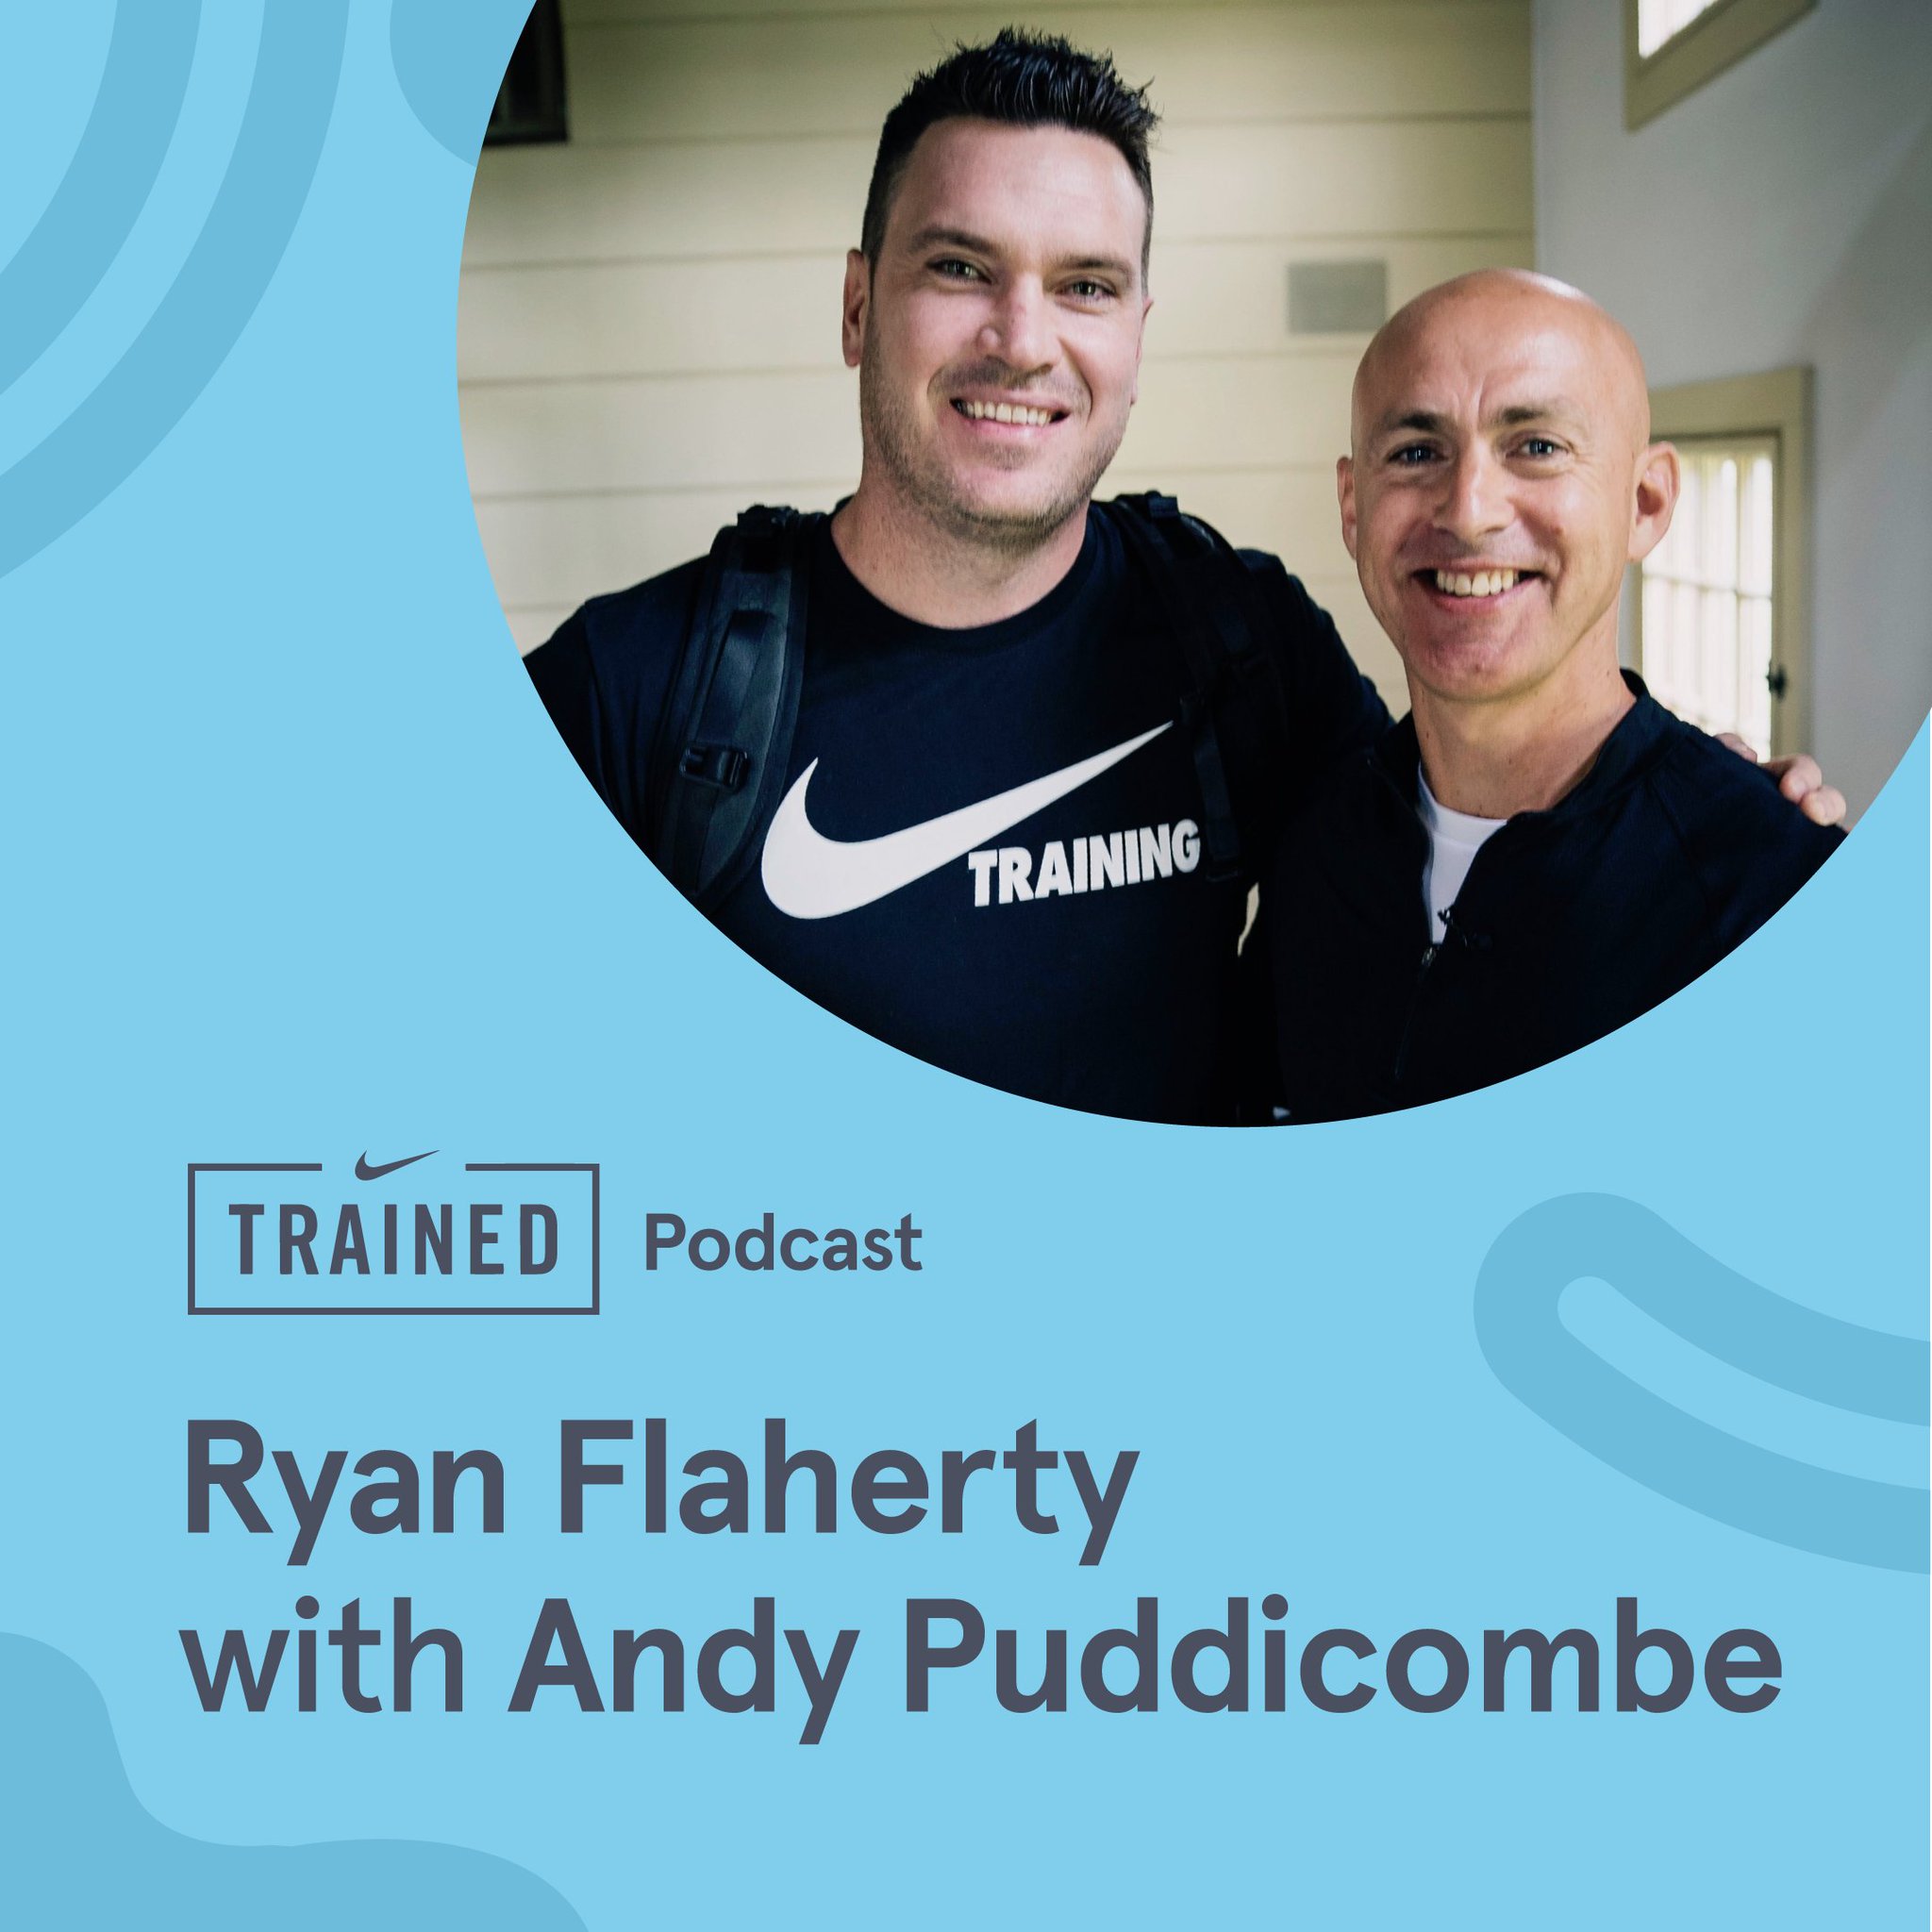 blusa calculadora Miedo a morir Headspace on Twitter: "For athletes, mindset is everything when it comes to  peak performance. In this must-listen episode of @Nike's new podcast,  TRAINED, host Ryan Flaherty talks w/@andypuddicombe about the importance of